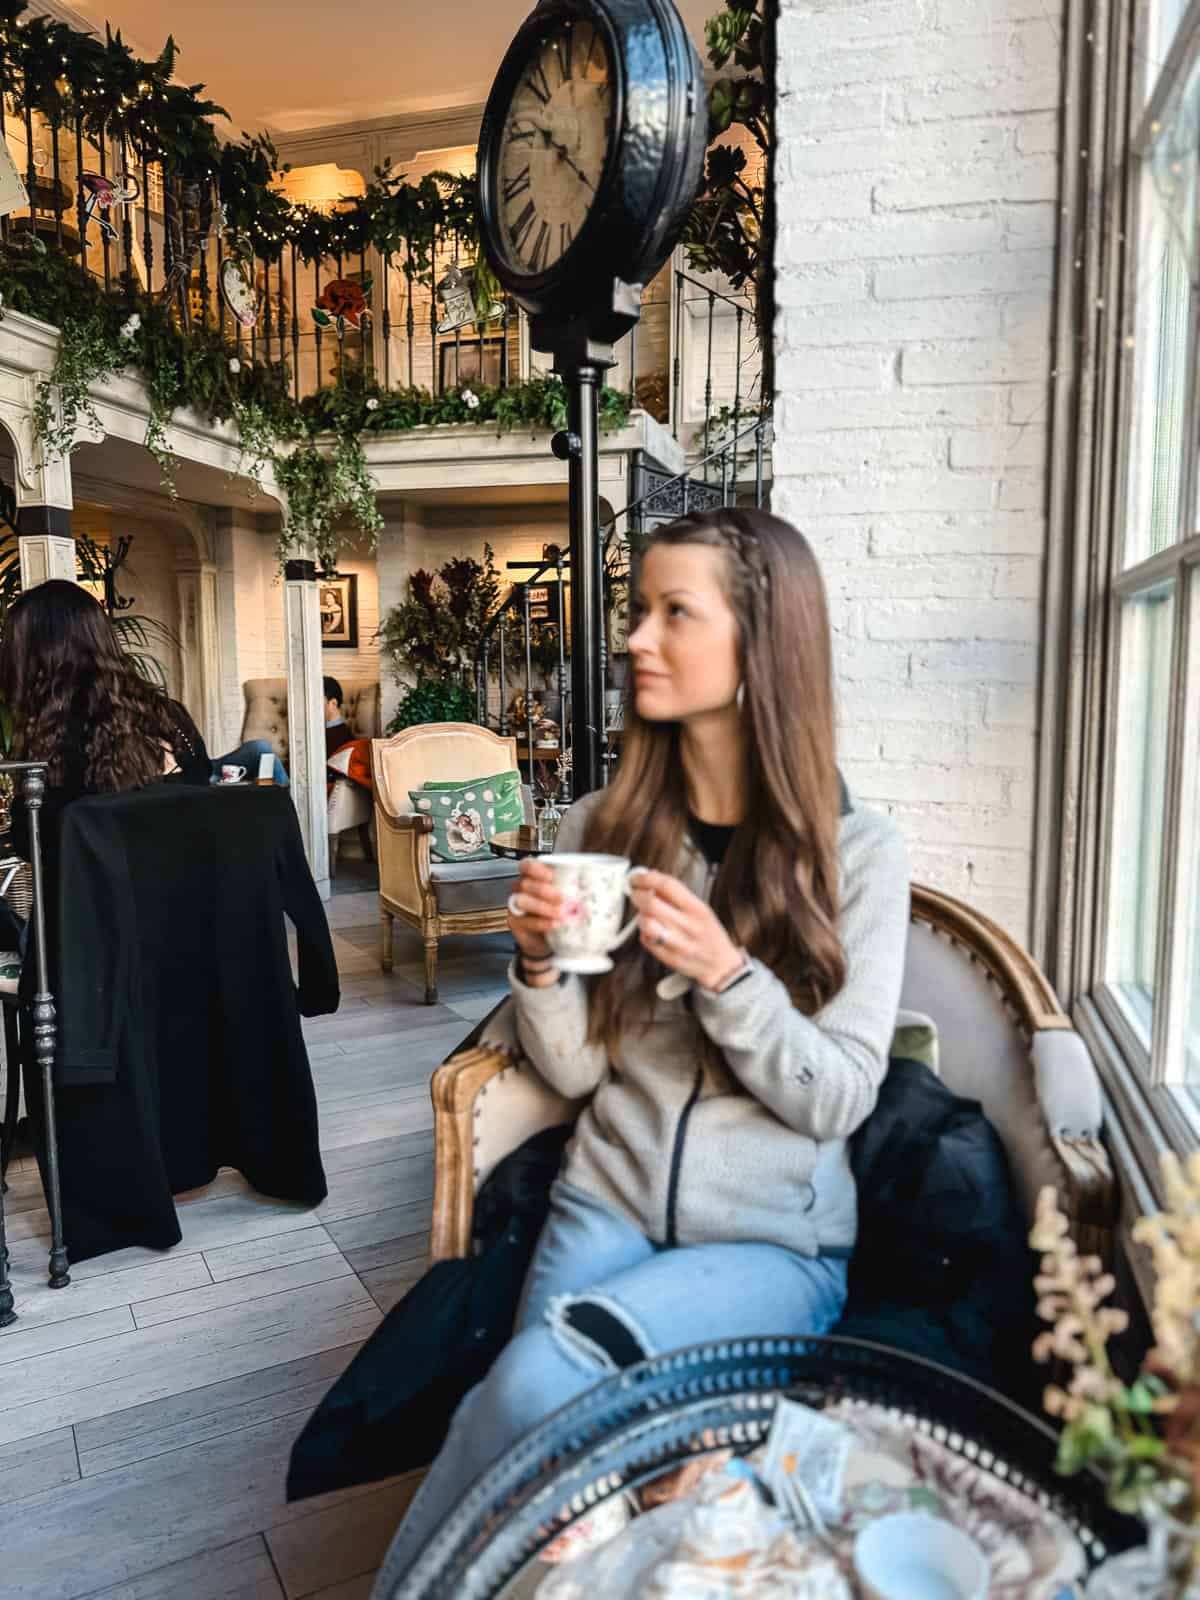 A woman enjoying a cozy tea time in a quaint café with a vintage interior and a lush green balcony in the background